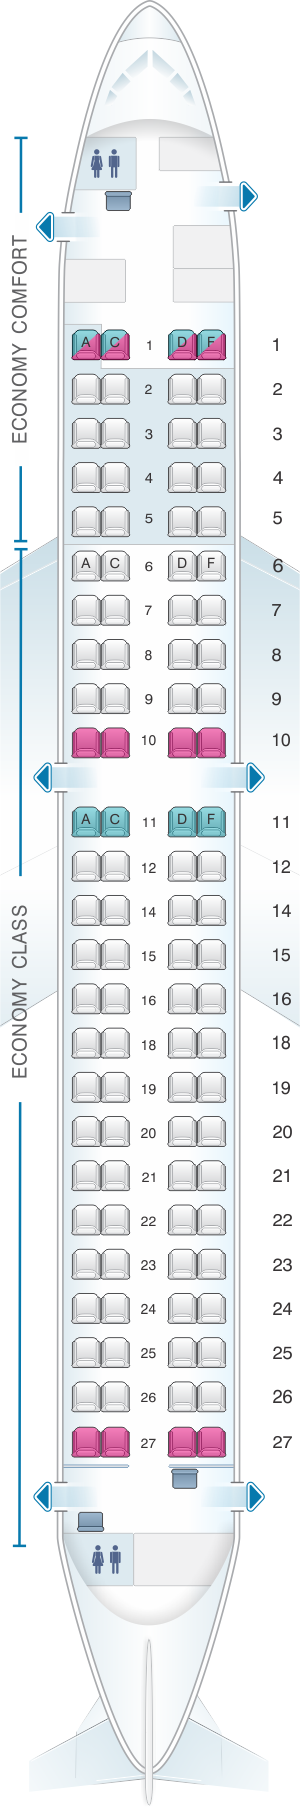 Seat map for Alitalia Airlines - Air One Embraer 190